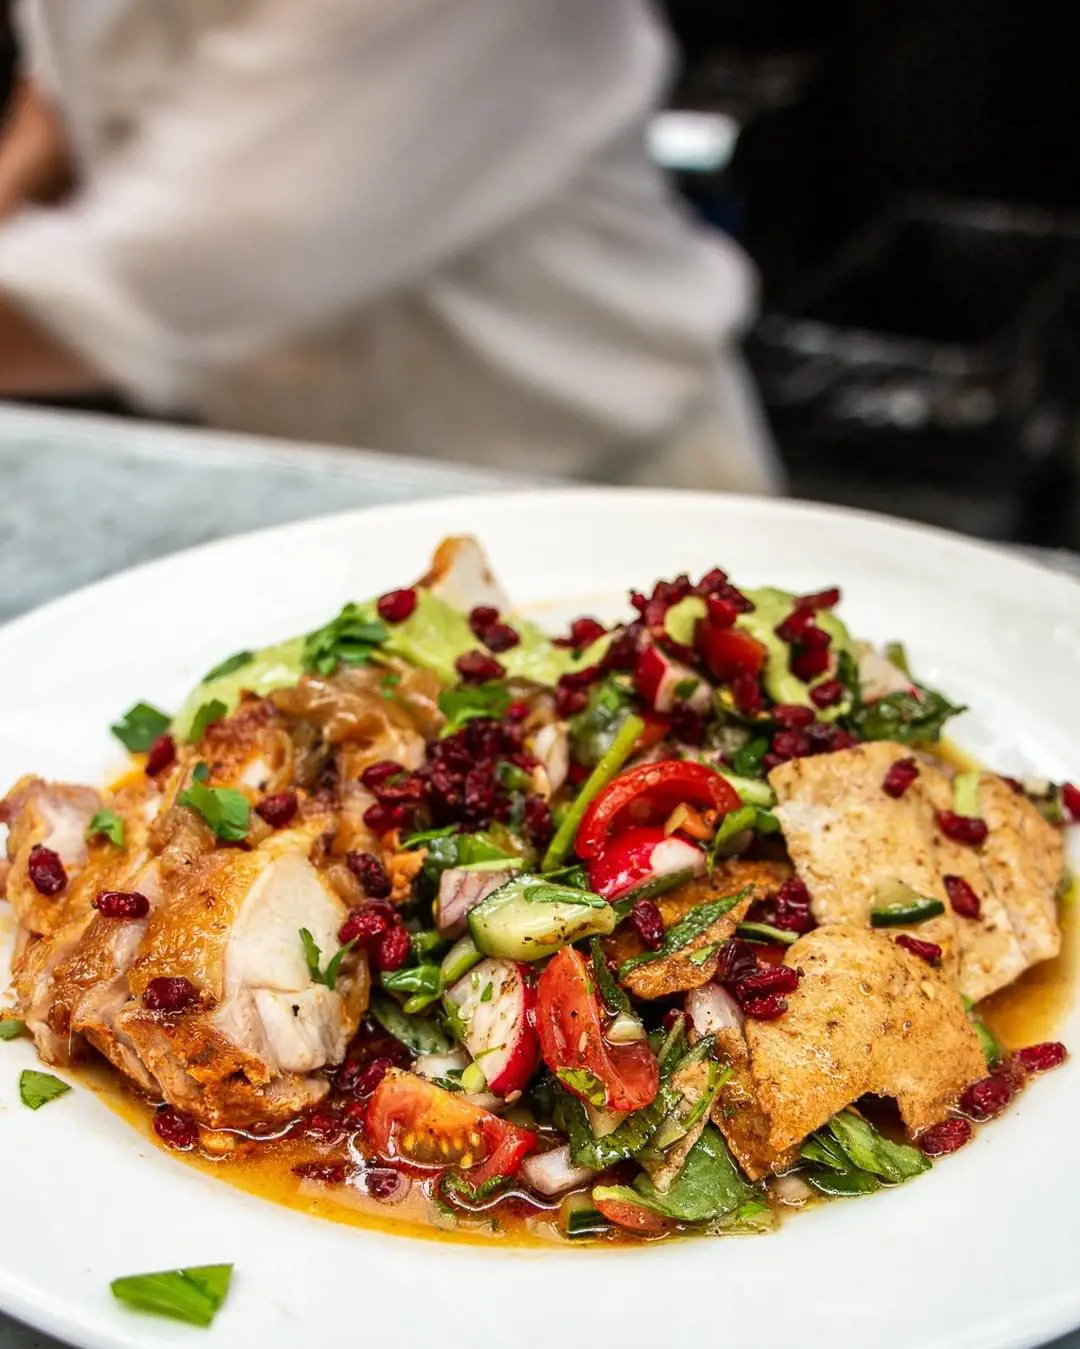 Wood roasted chicken, fattoush salad and Gaziantep pistachio sauce...